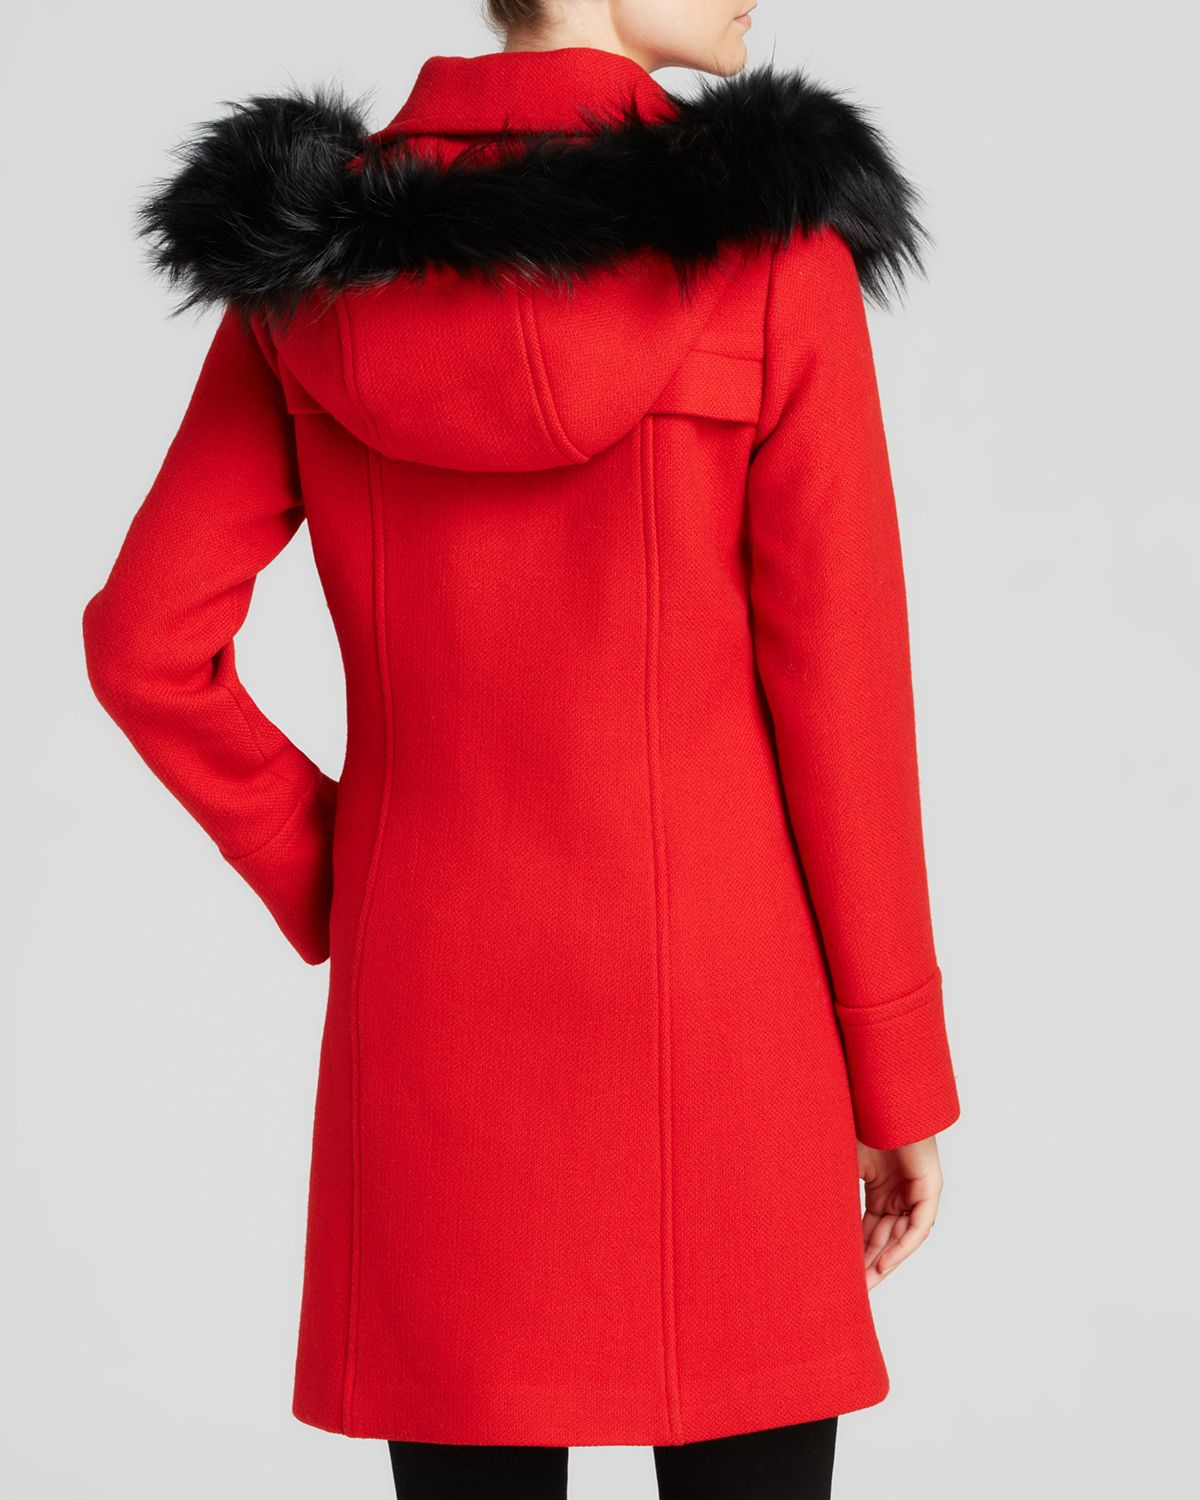 Lyst - Milly Coat Double Wool Duffle with Fur Trim Hood in Red